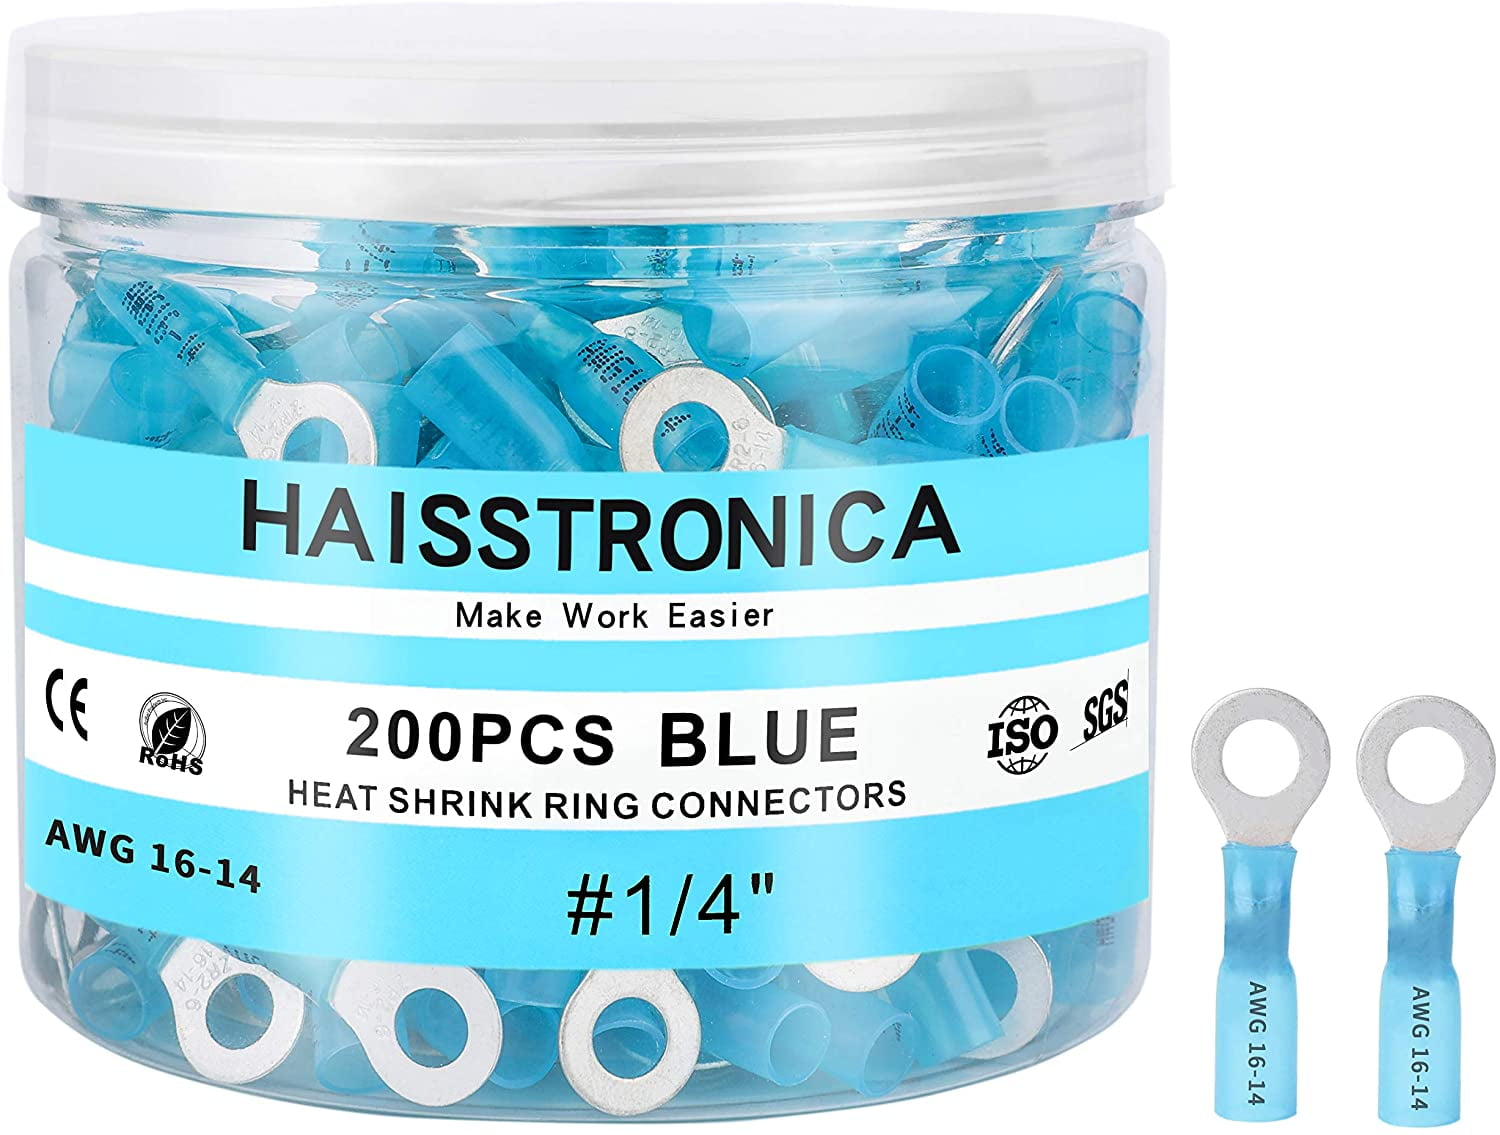 Haisstronica 200pcs 1/4 Blue Marine Grade Heat Shrink Ring Connectors-Tinned red Copper 0.7mm Ring Terminal Connectors-Heat Shrink Wire Connectors-Insulated Electrical Crimp Terminals 16-14 Gauge 